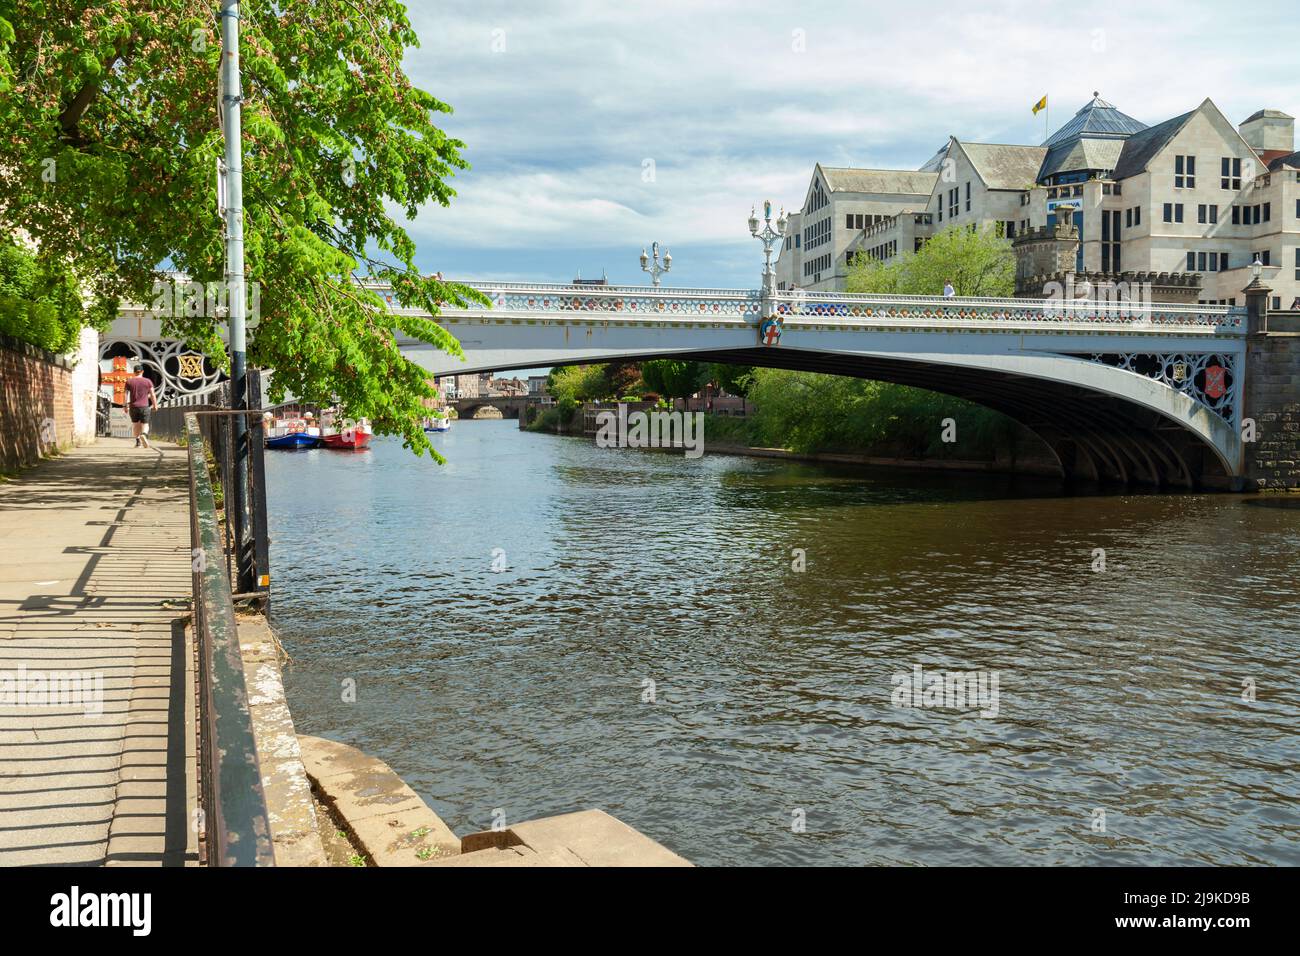 Spring afternoon at Lendal Bridge over river Ouse in York, England. Stock Photo